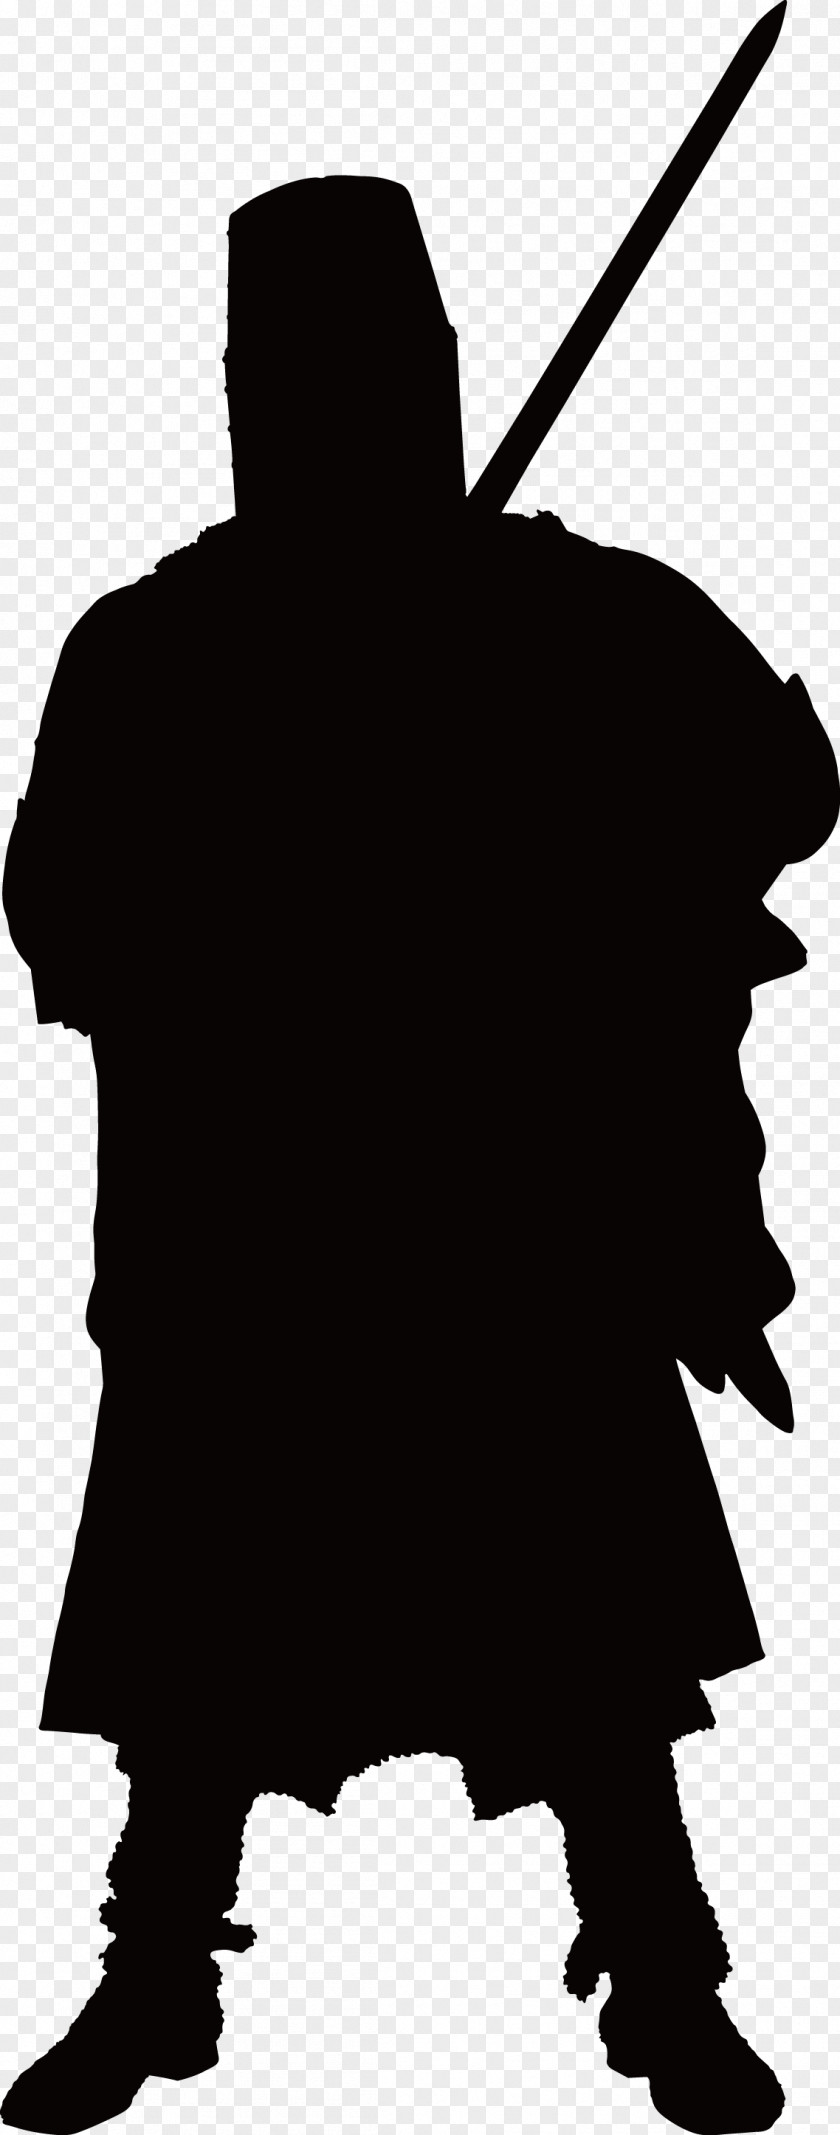 Soldier,Sketch Middle Ages Knight Silhouette Armour Illustration PNG